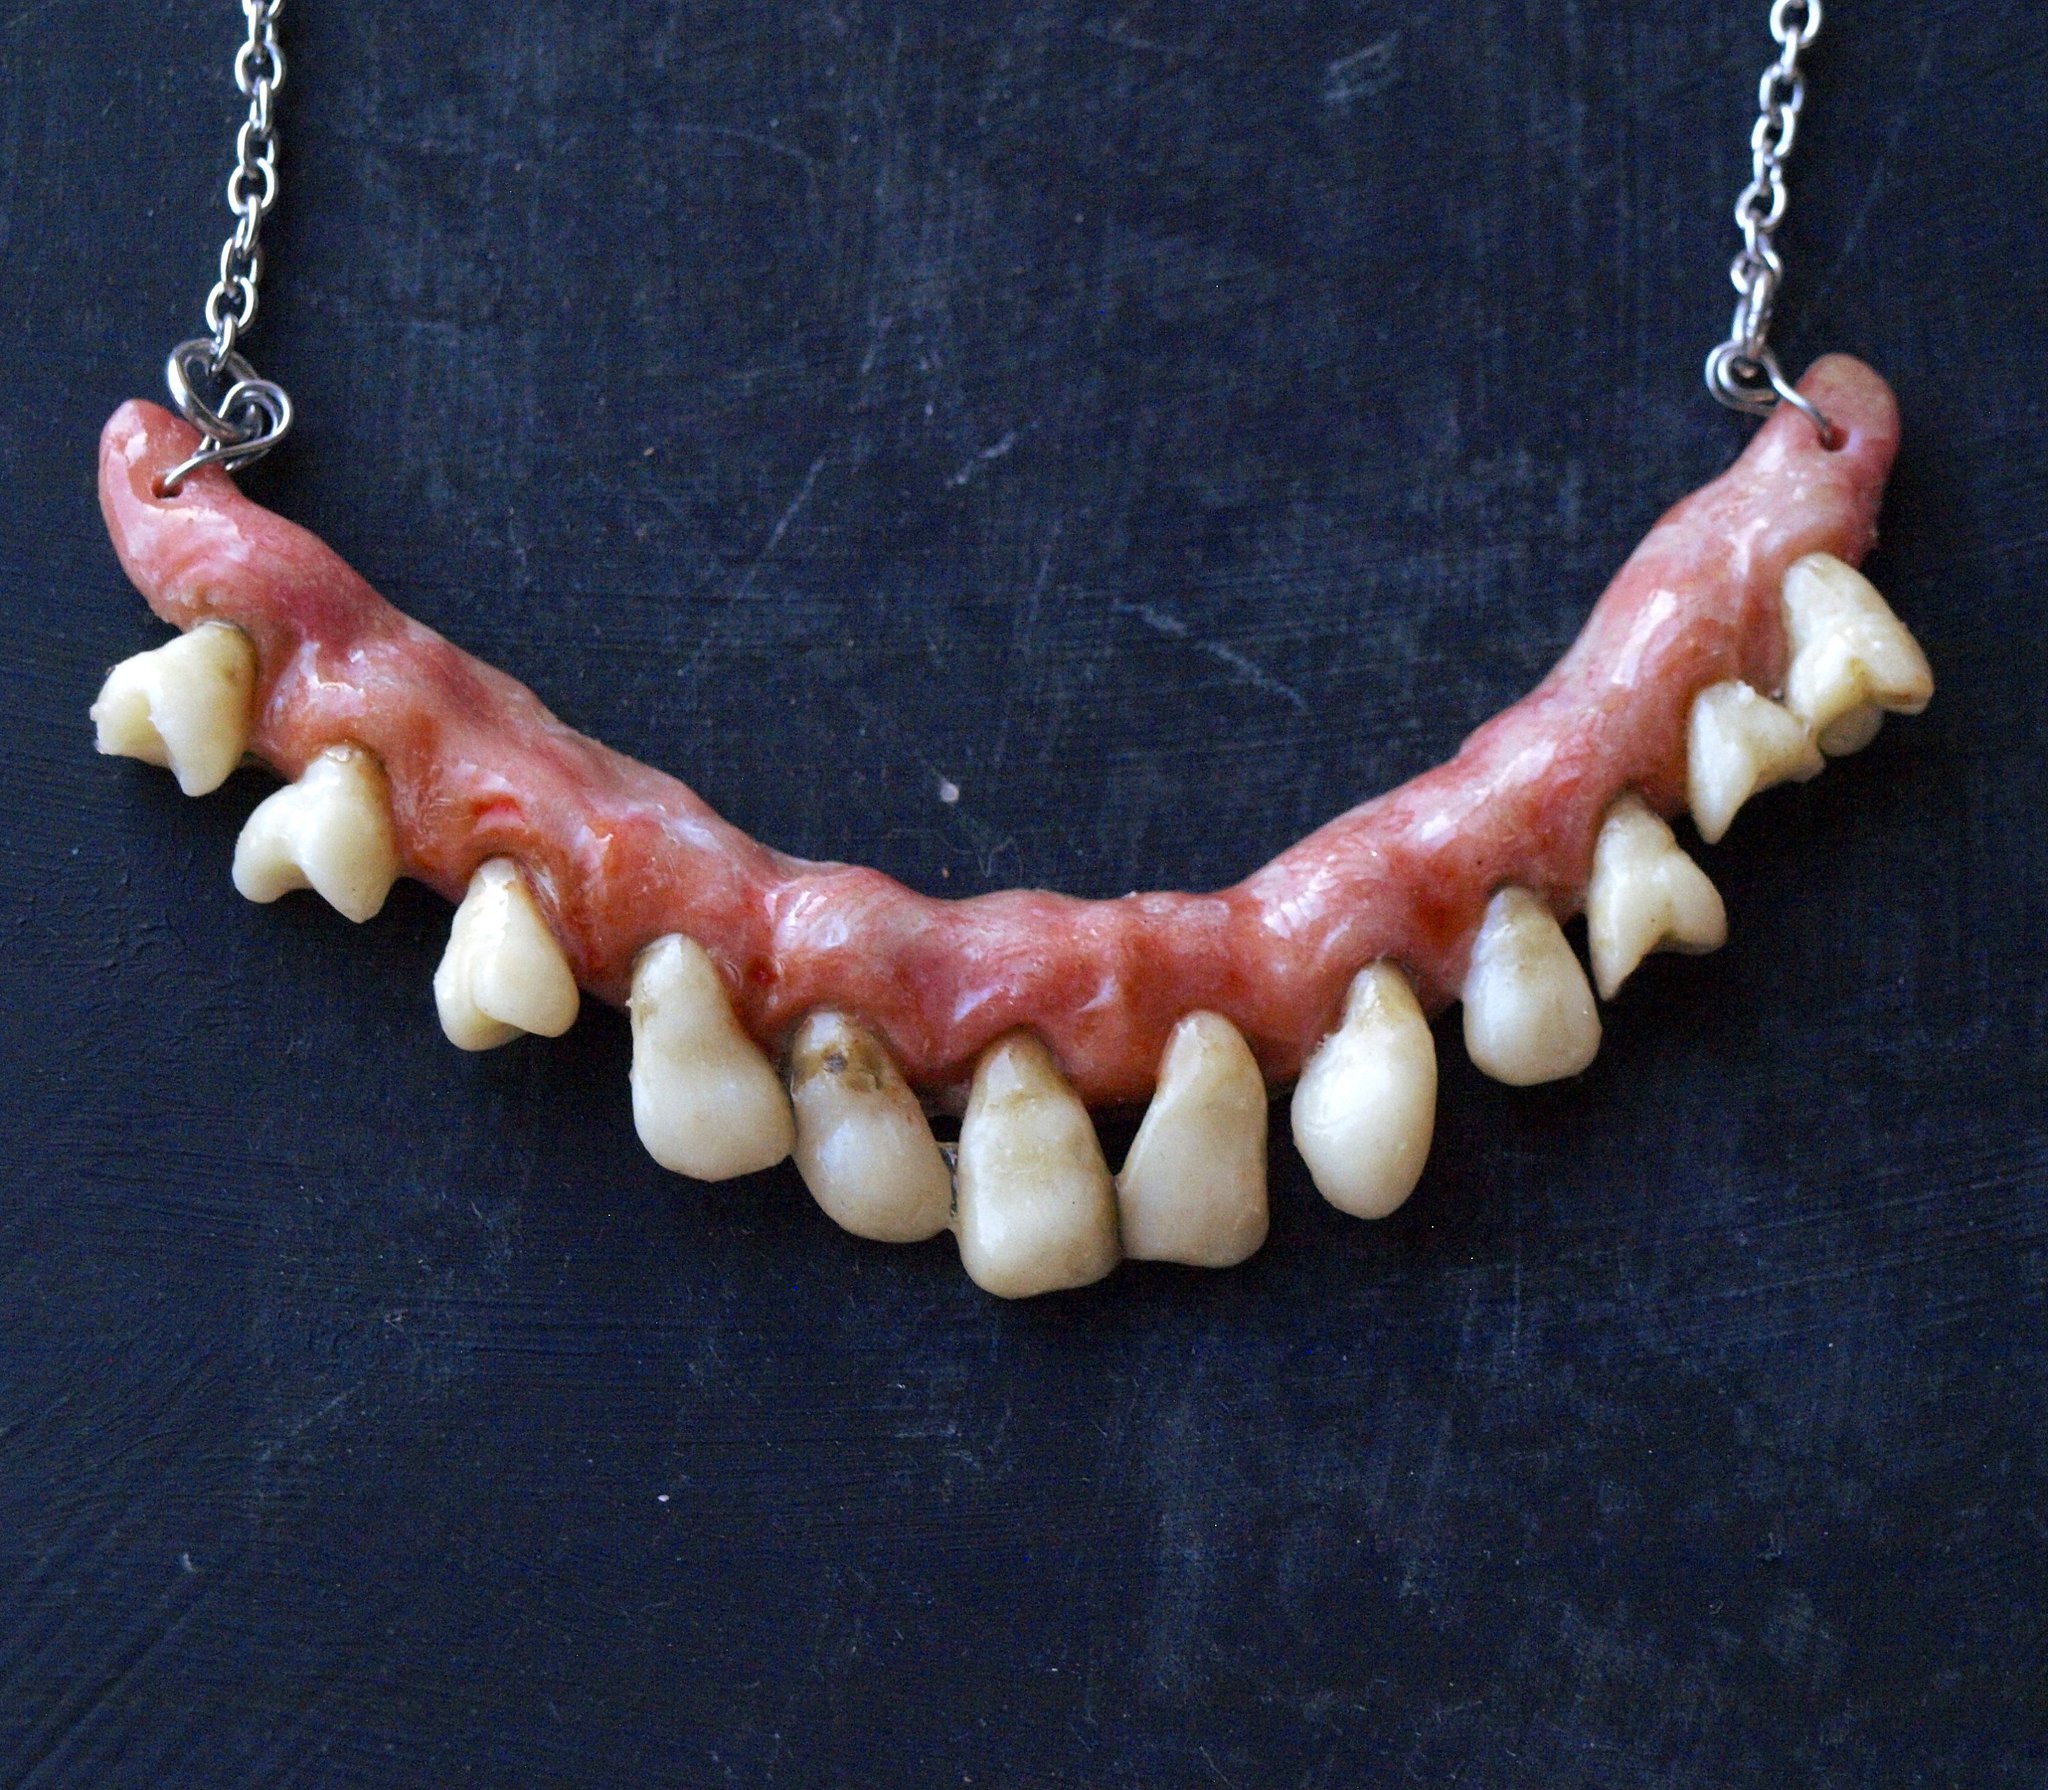 Cursed Presents On Twitter Human Teeth Necklace